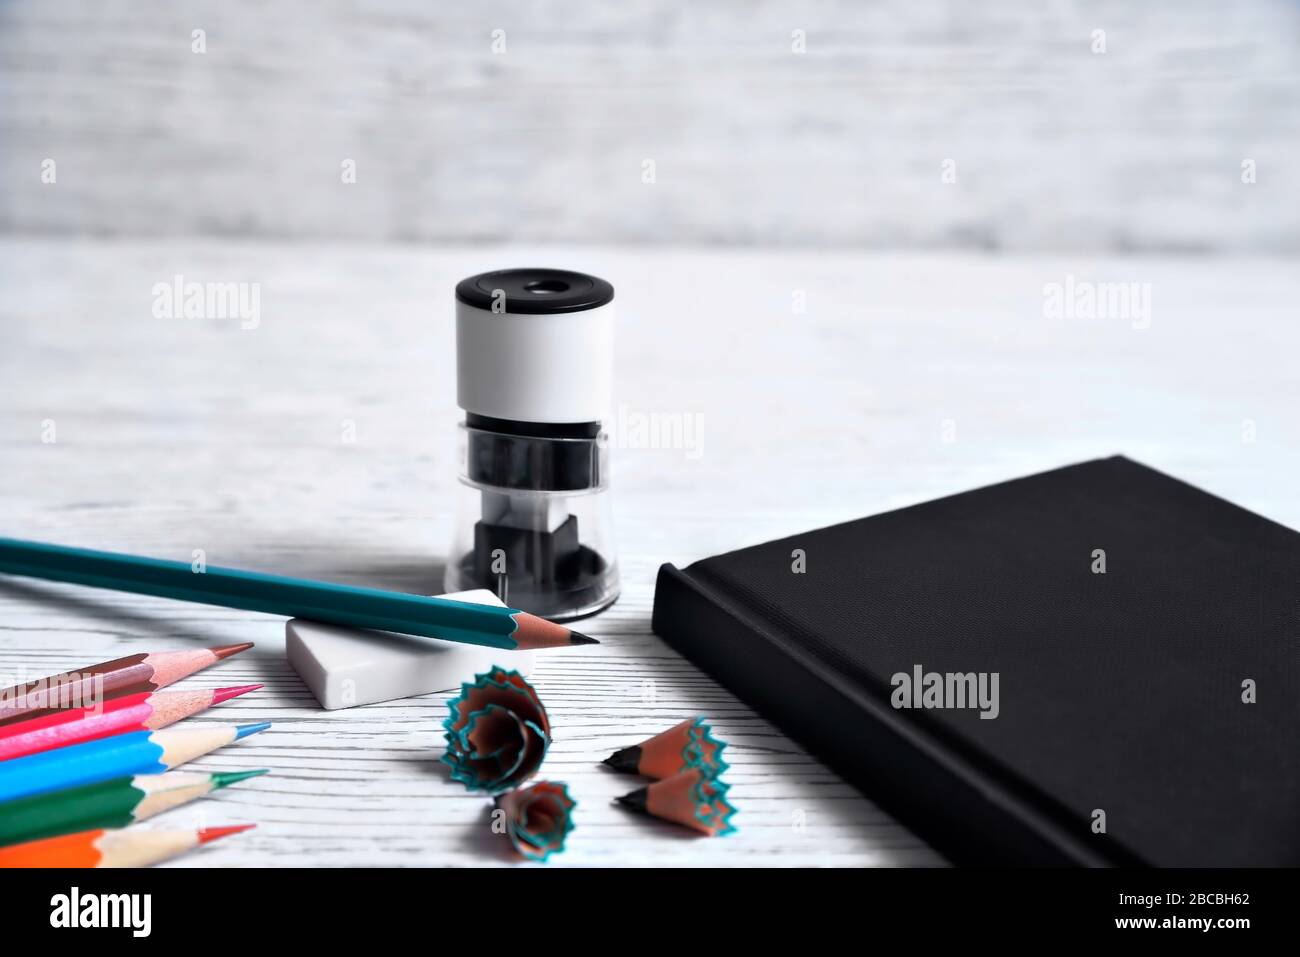 Pencils, notepad, sharpener, eraser and shavings from pencils on a gray non-uniform background Stock Photo